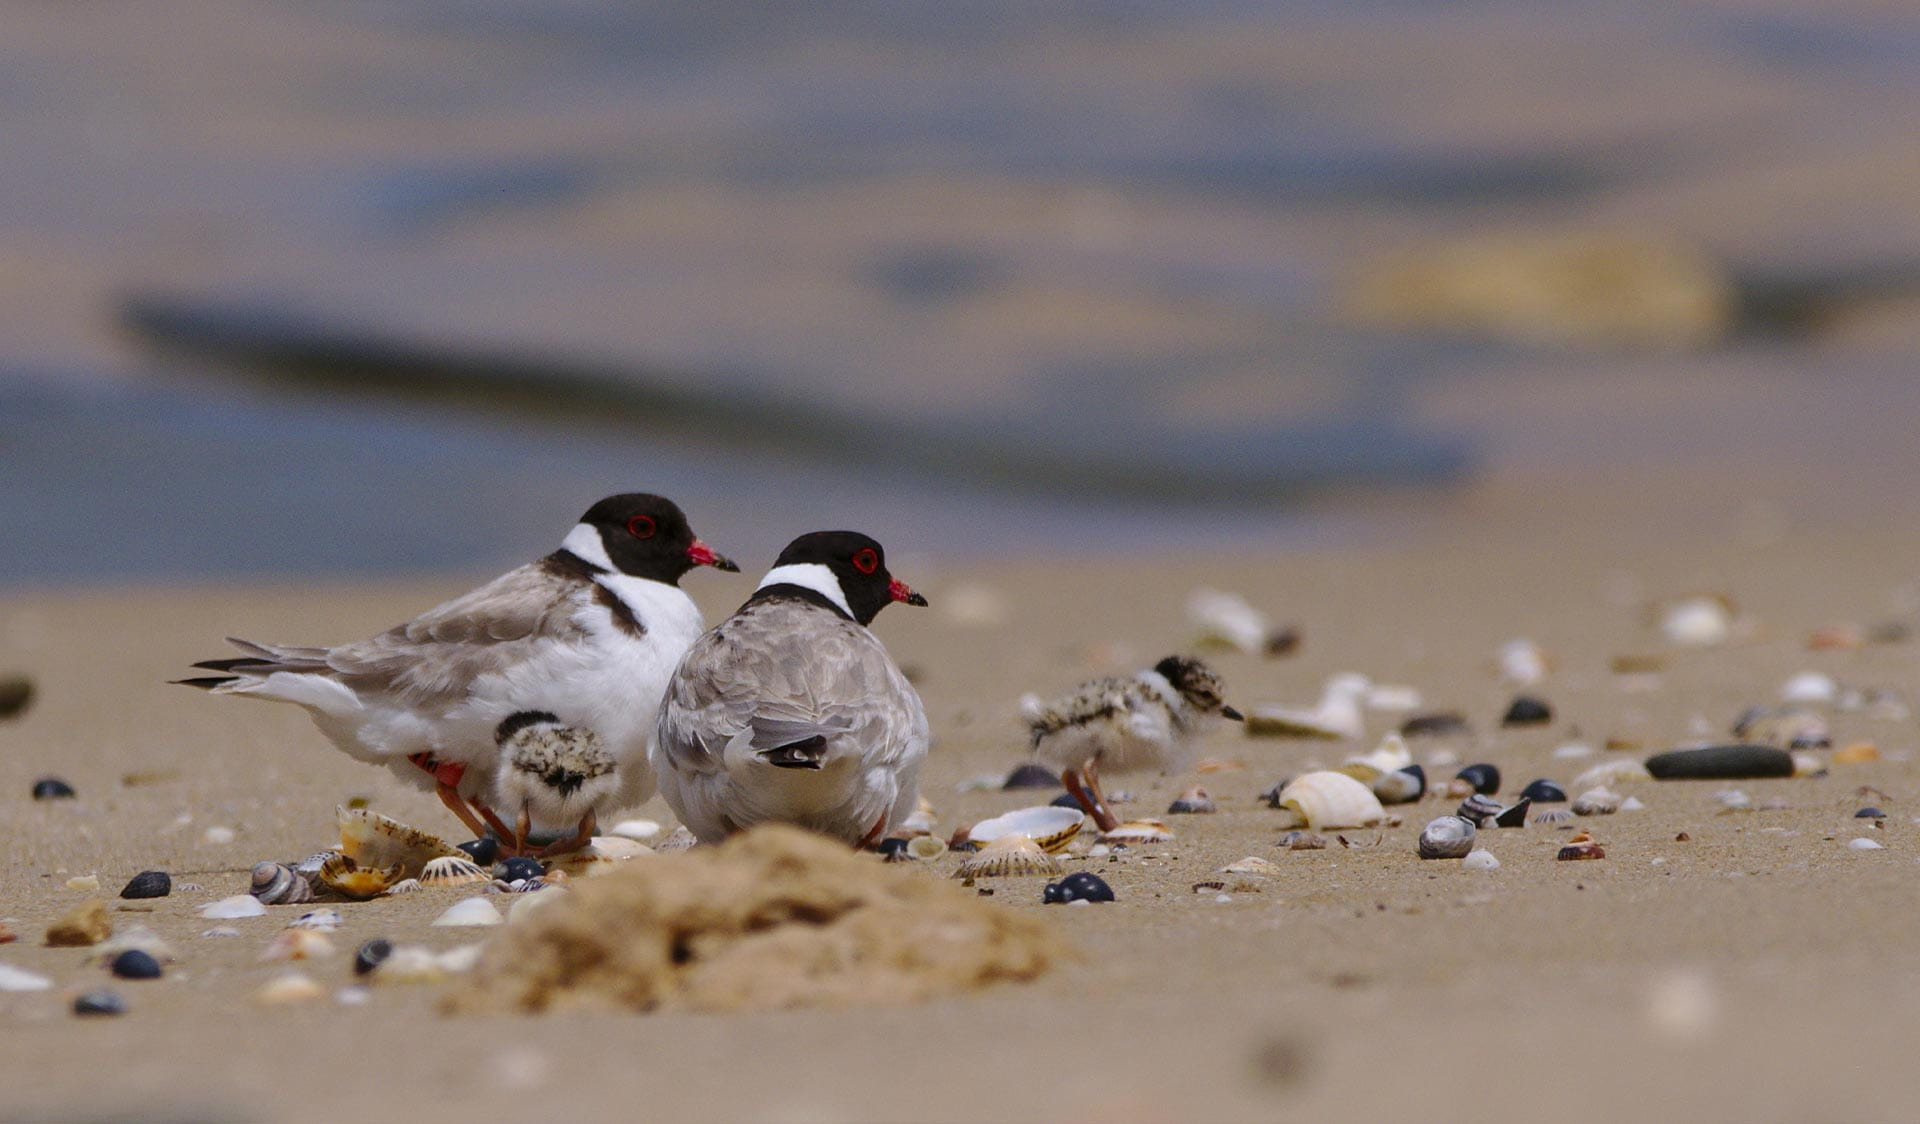 Hooded plovers and chick on the sand at Belfast Coastal Reserve